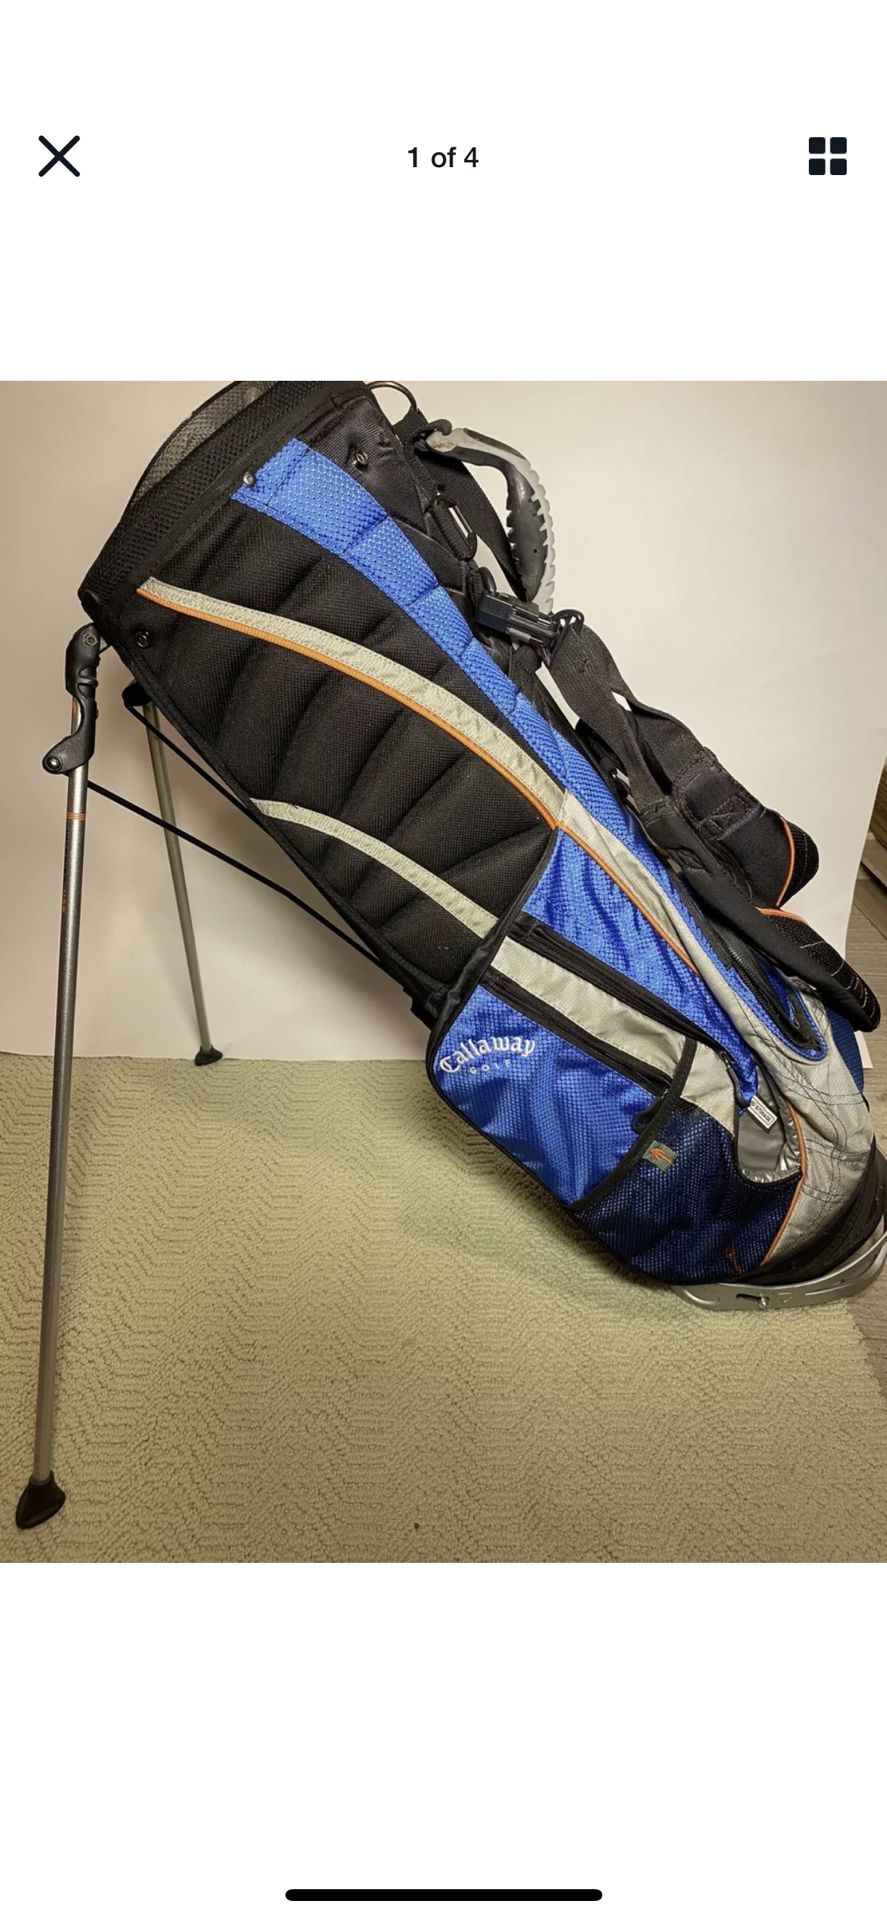 Callaway 8 Way Golf Cart Bag w/ Stand & Backpack Straps- Used, GREAT Condition